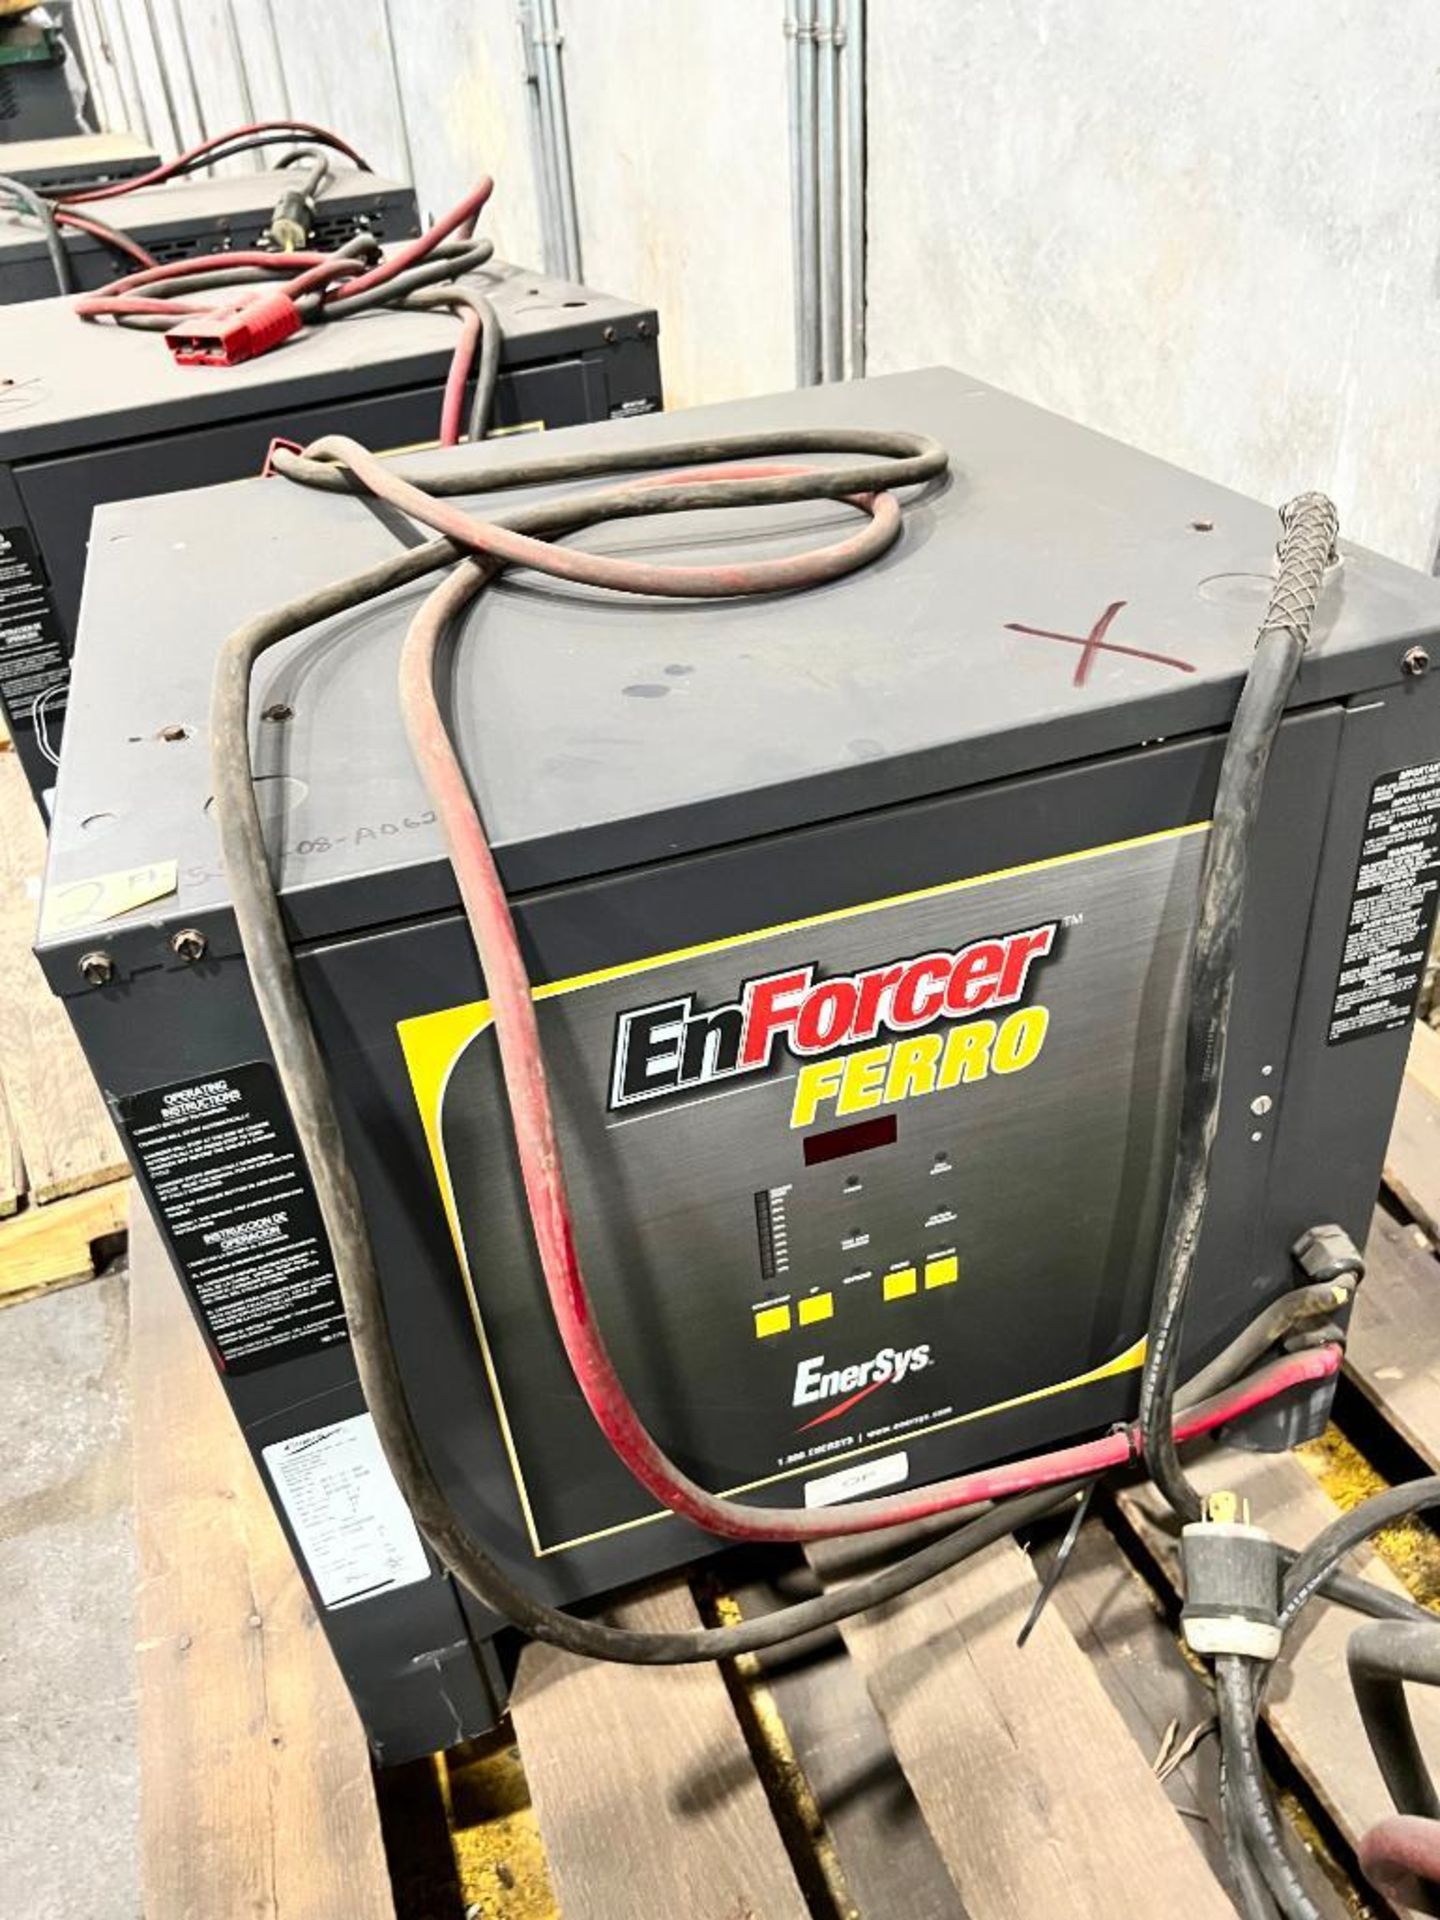 Enersys Enforcer Ferro 24 Battery Charger, Model EF3-12-865, S/N GE33395 ($25 Loading fee will be ad